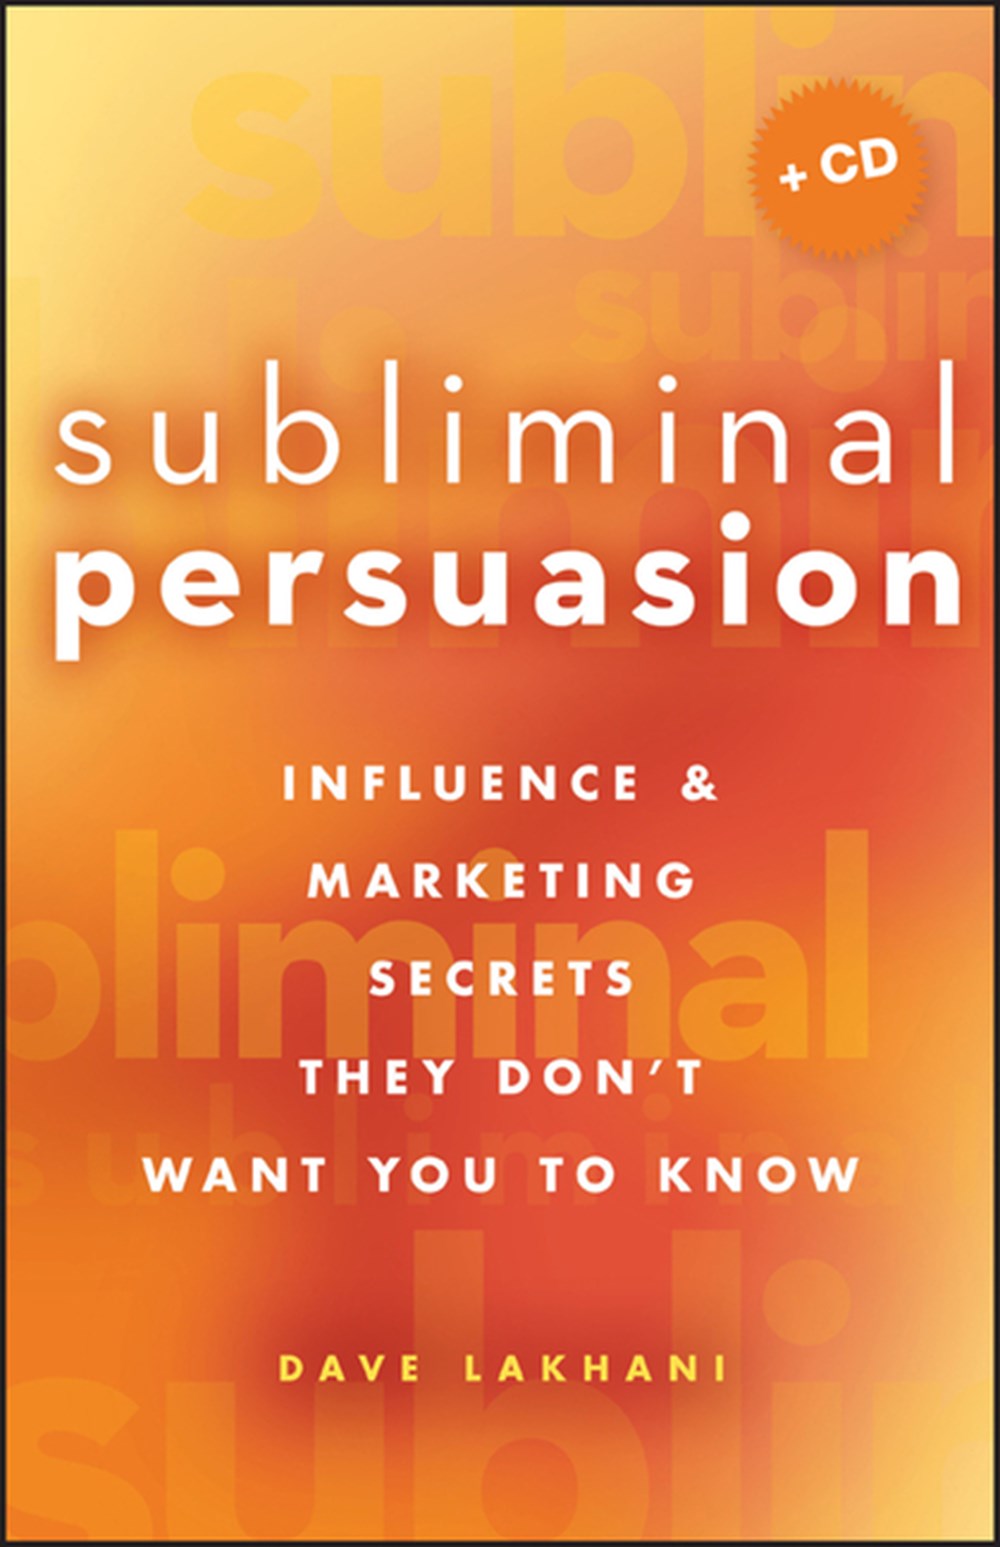 Subliminal Persuasion Influence & Marketing Secrets They Don't Want You to Know [With CDROM]